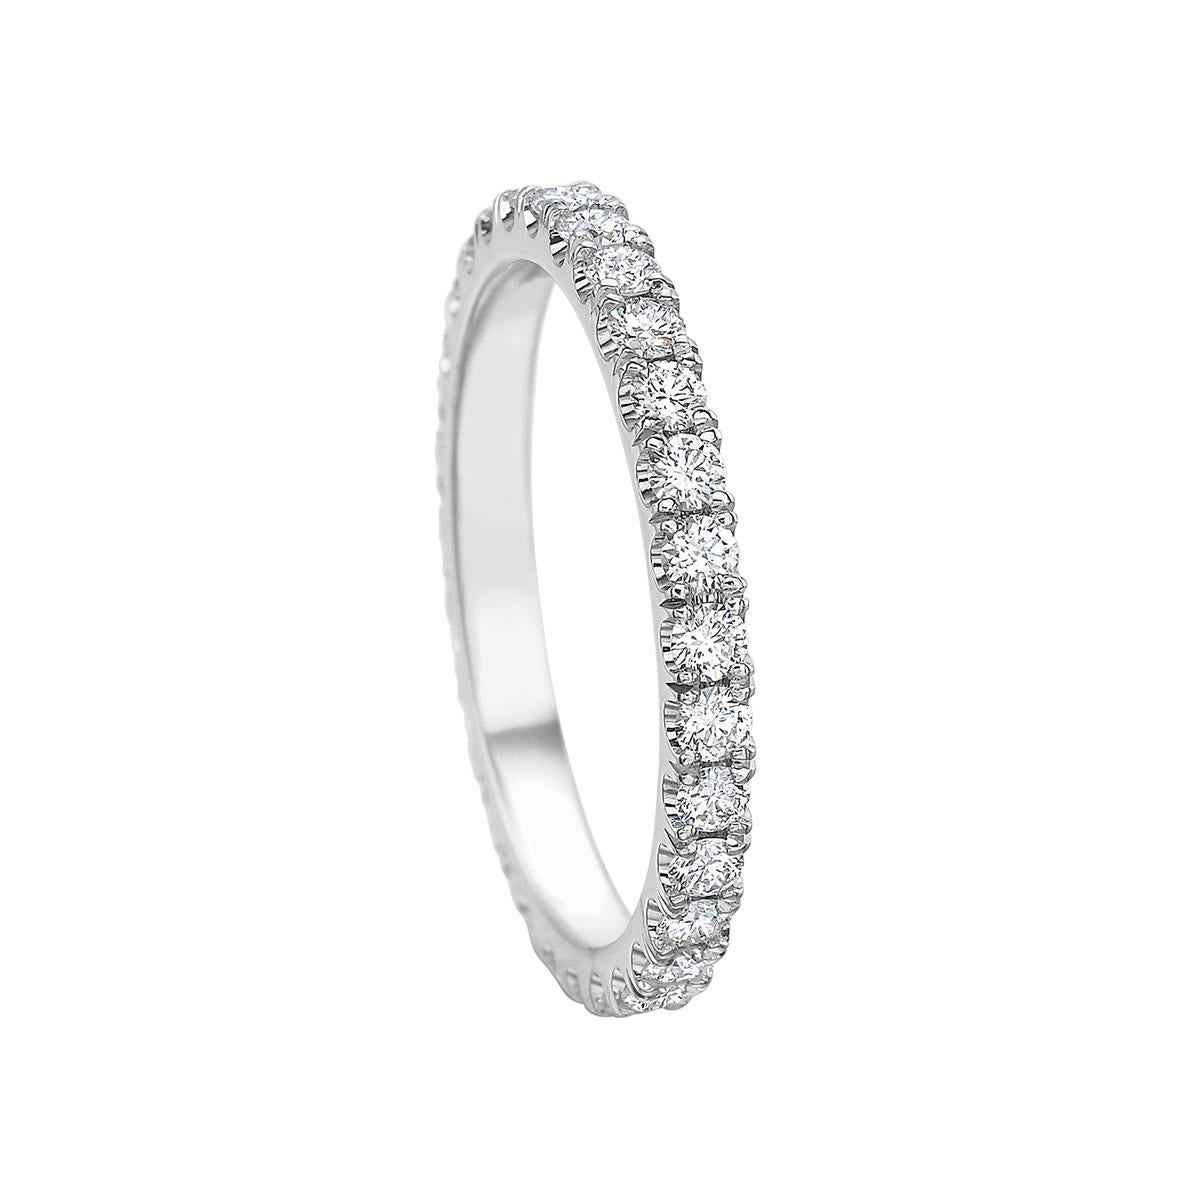 Comfort fit eternity band ring, featuring near-colorless round brilliant-cut diamonds bead-set in polished platinum.

Thirty diamonds weighing 0.70 total carats
1.9mm wide
Size 6